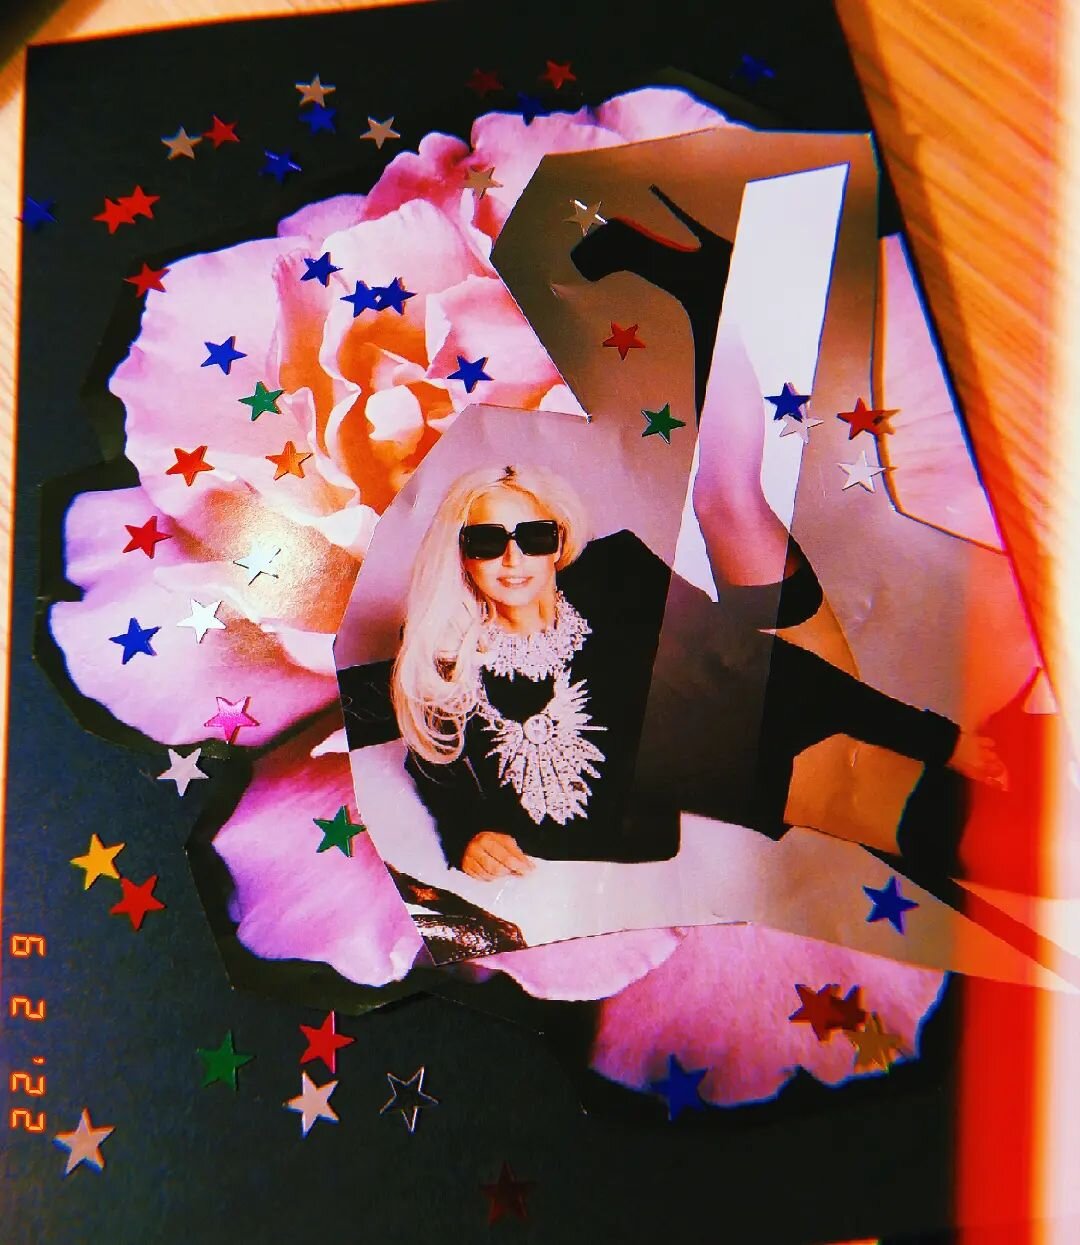 Day 6 #februllage : #overdress. My tribute to mother monster @ladygaga who in my opinion is never overdress 😂💕💕💕 

#februllage2022 @februllage
. 
#collage #photography #analogfilm #analog #analogphotography #graphicdesign #graphicdesigner #photos